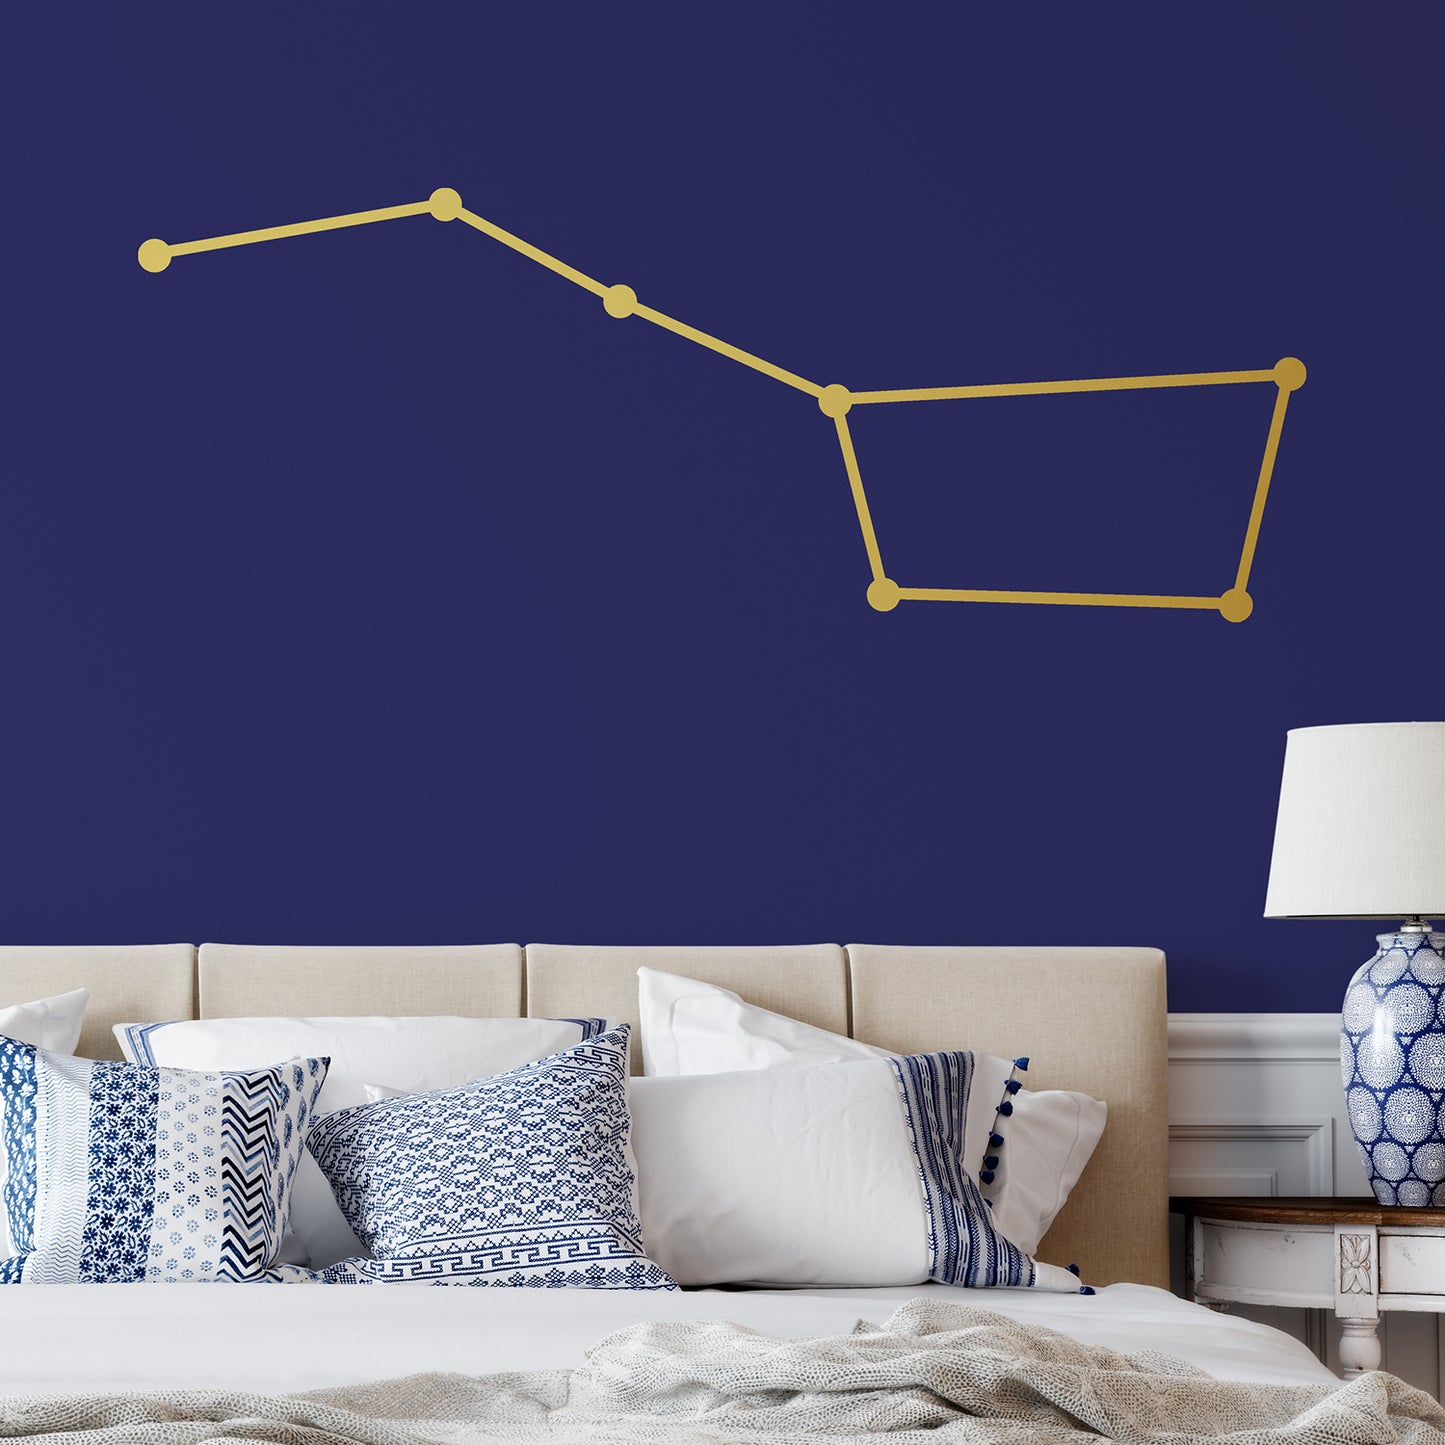 Big dipper constellation | Wall decal